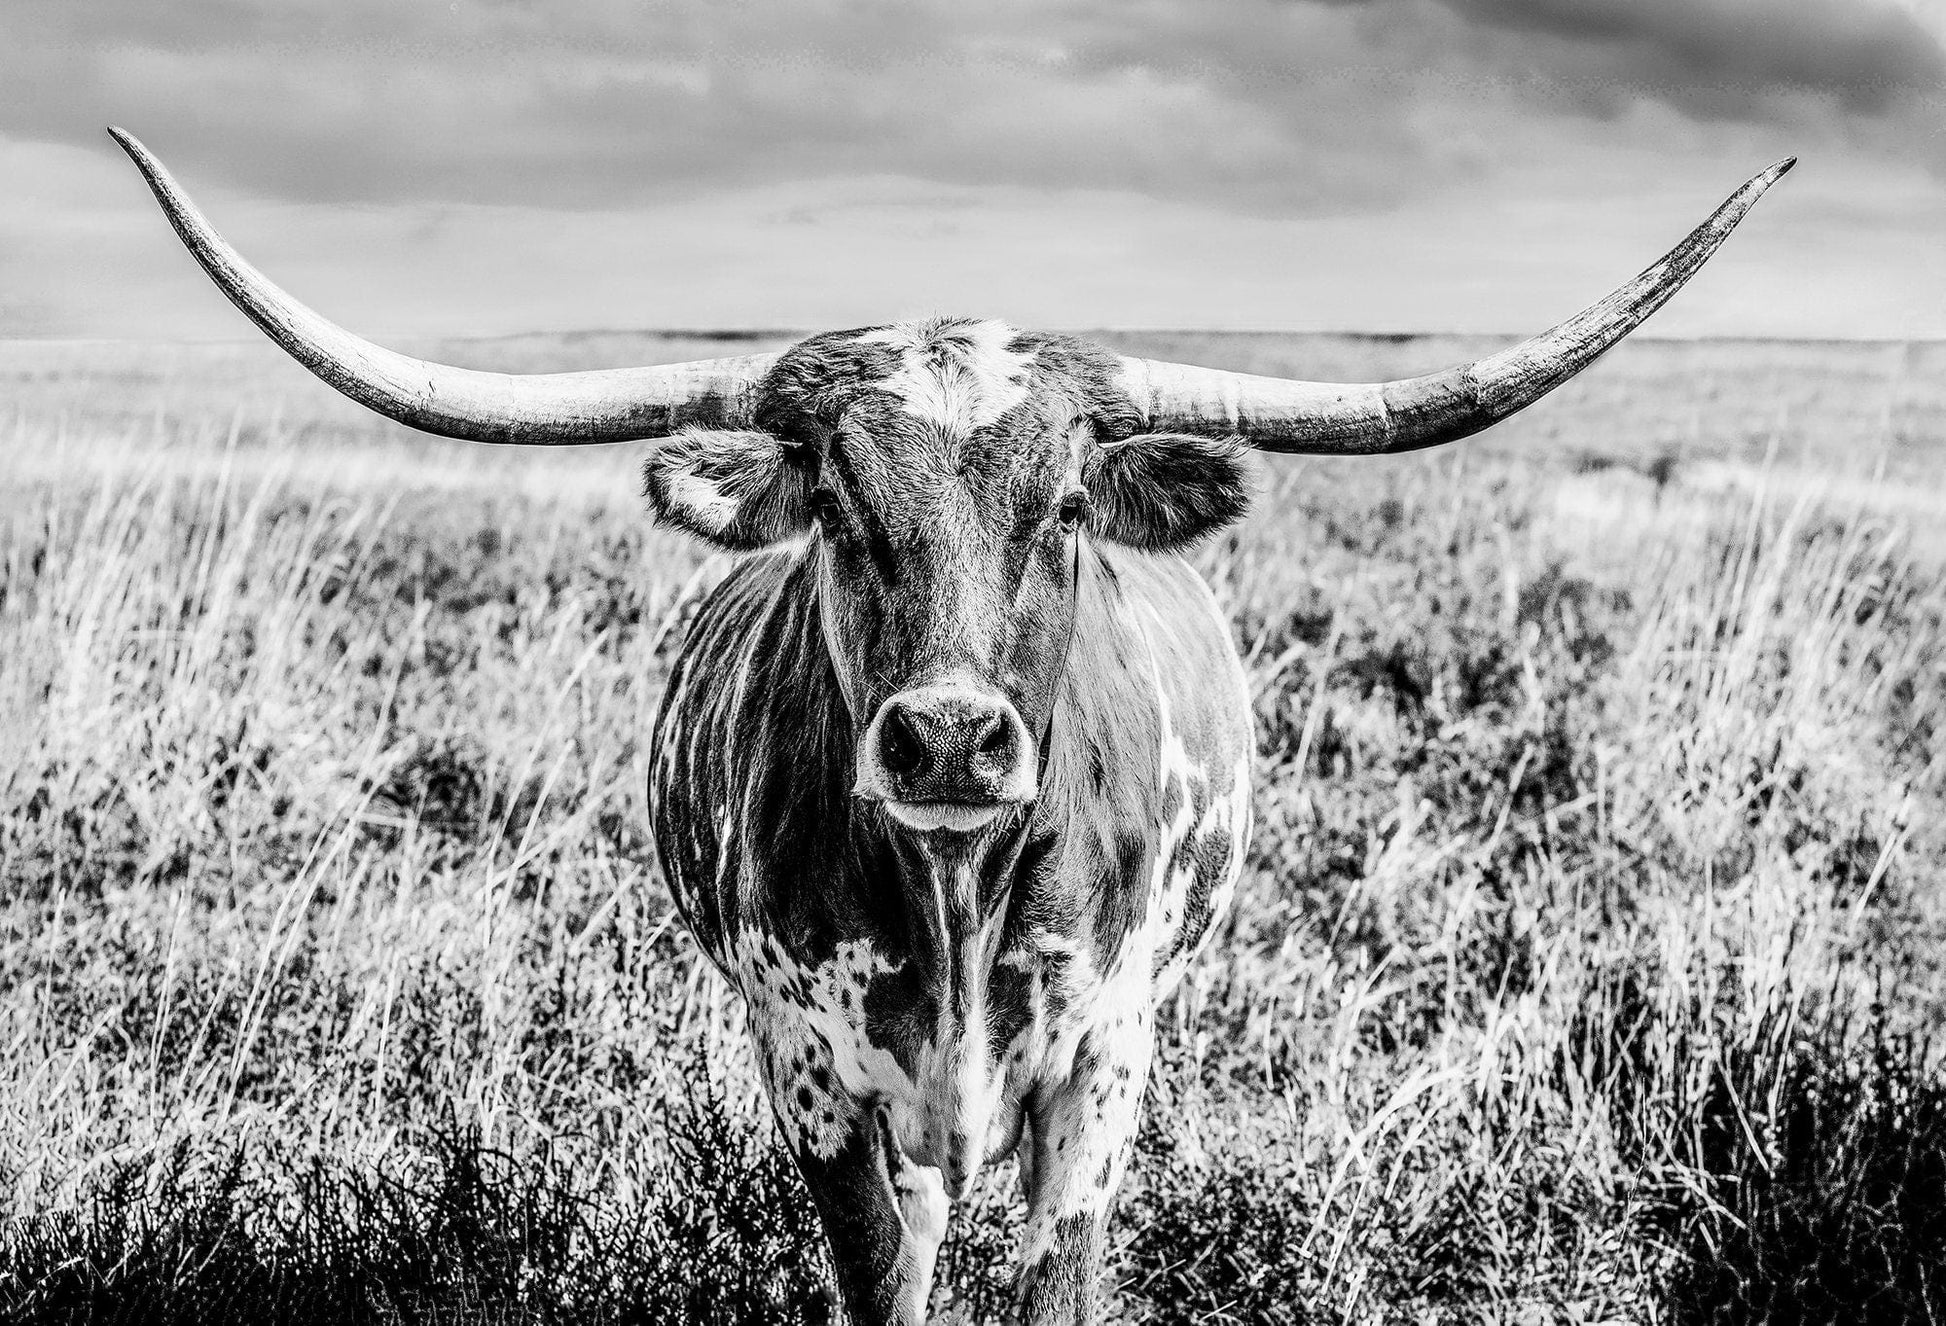 Teri James Photography Wall Art Paper Photo Print / 12 x 18 Inches Texas Longhorn Cow in Black and White